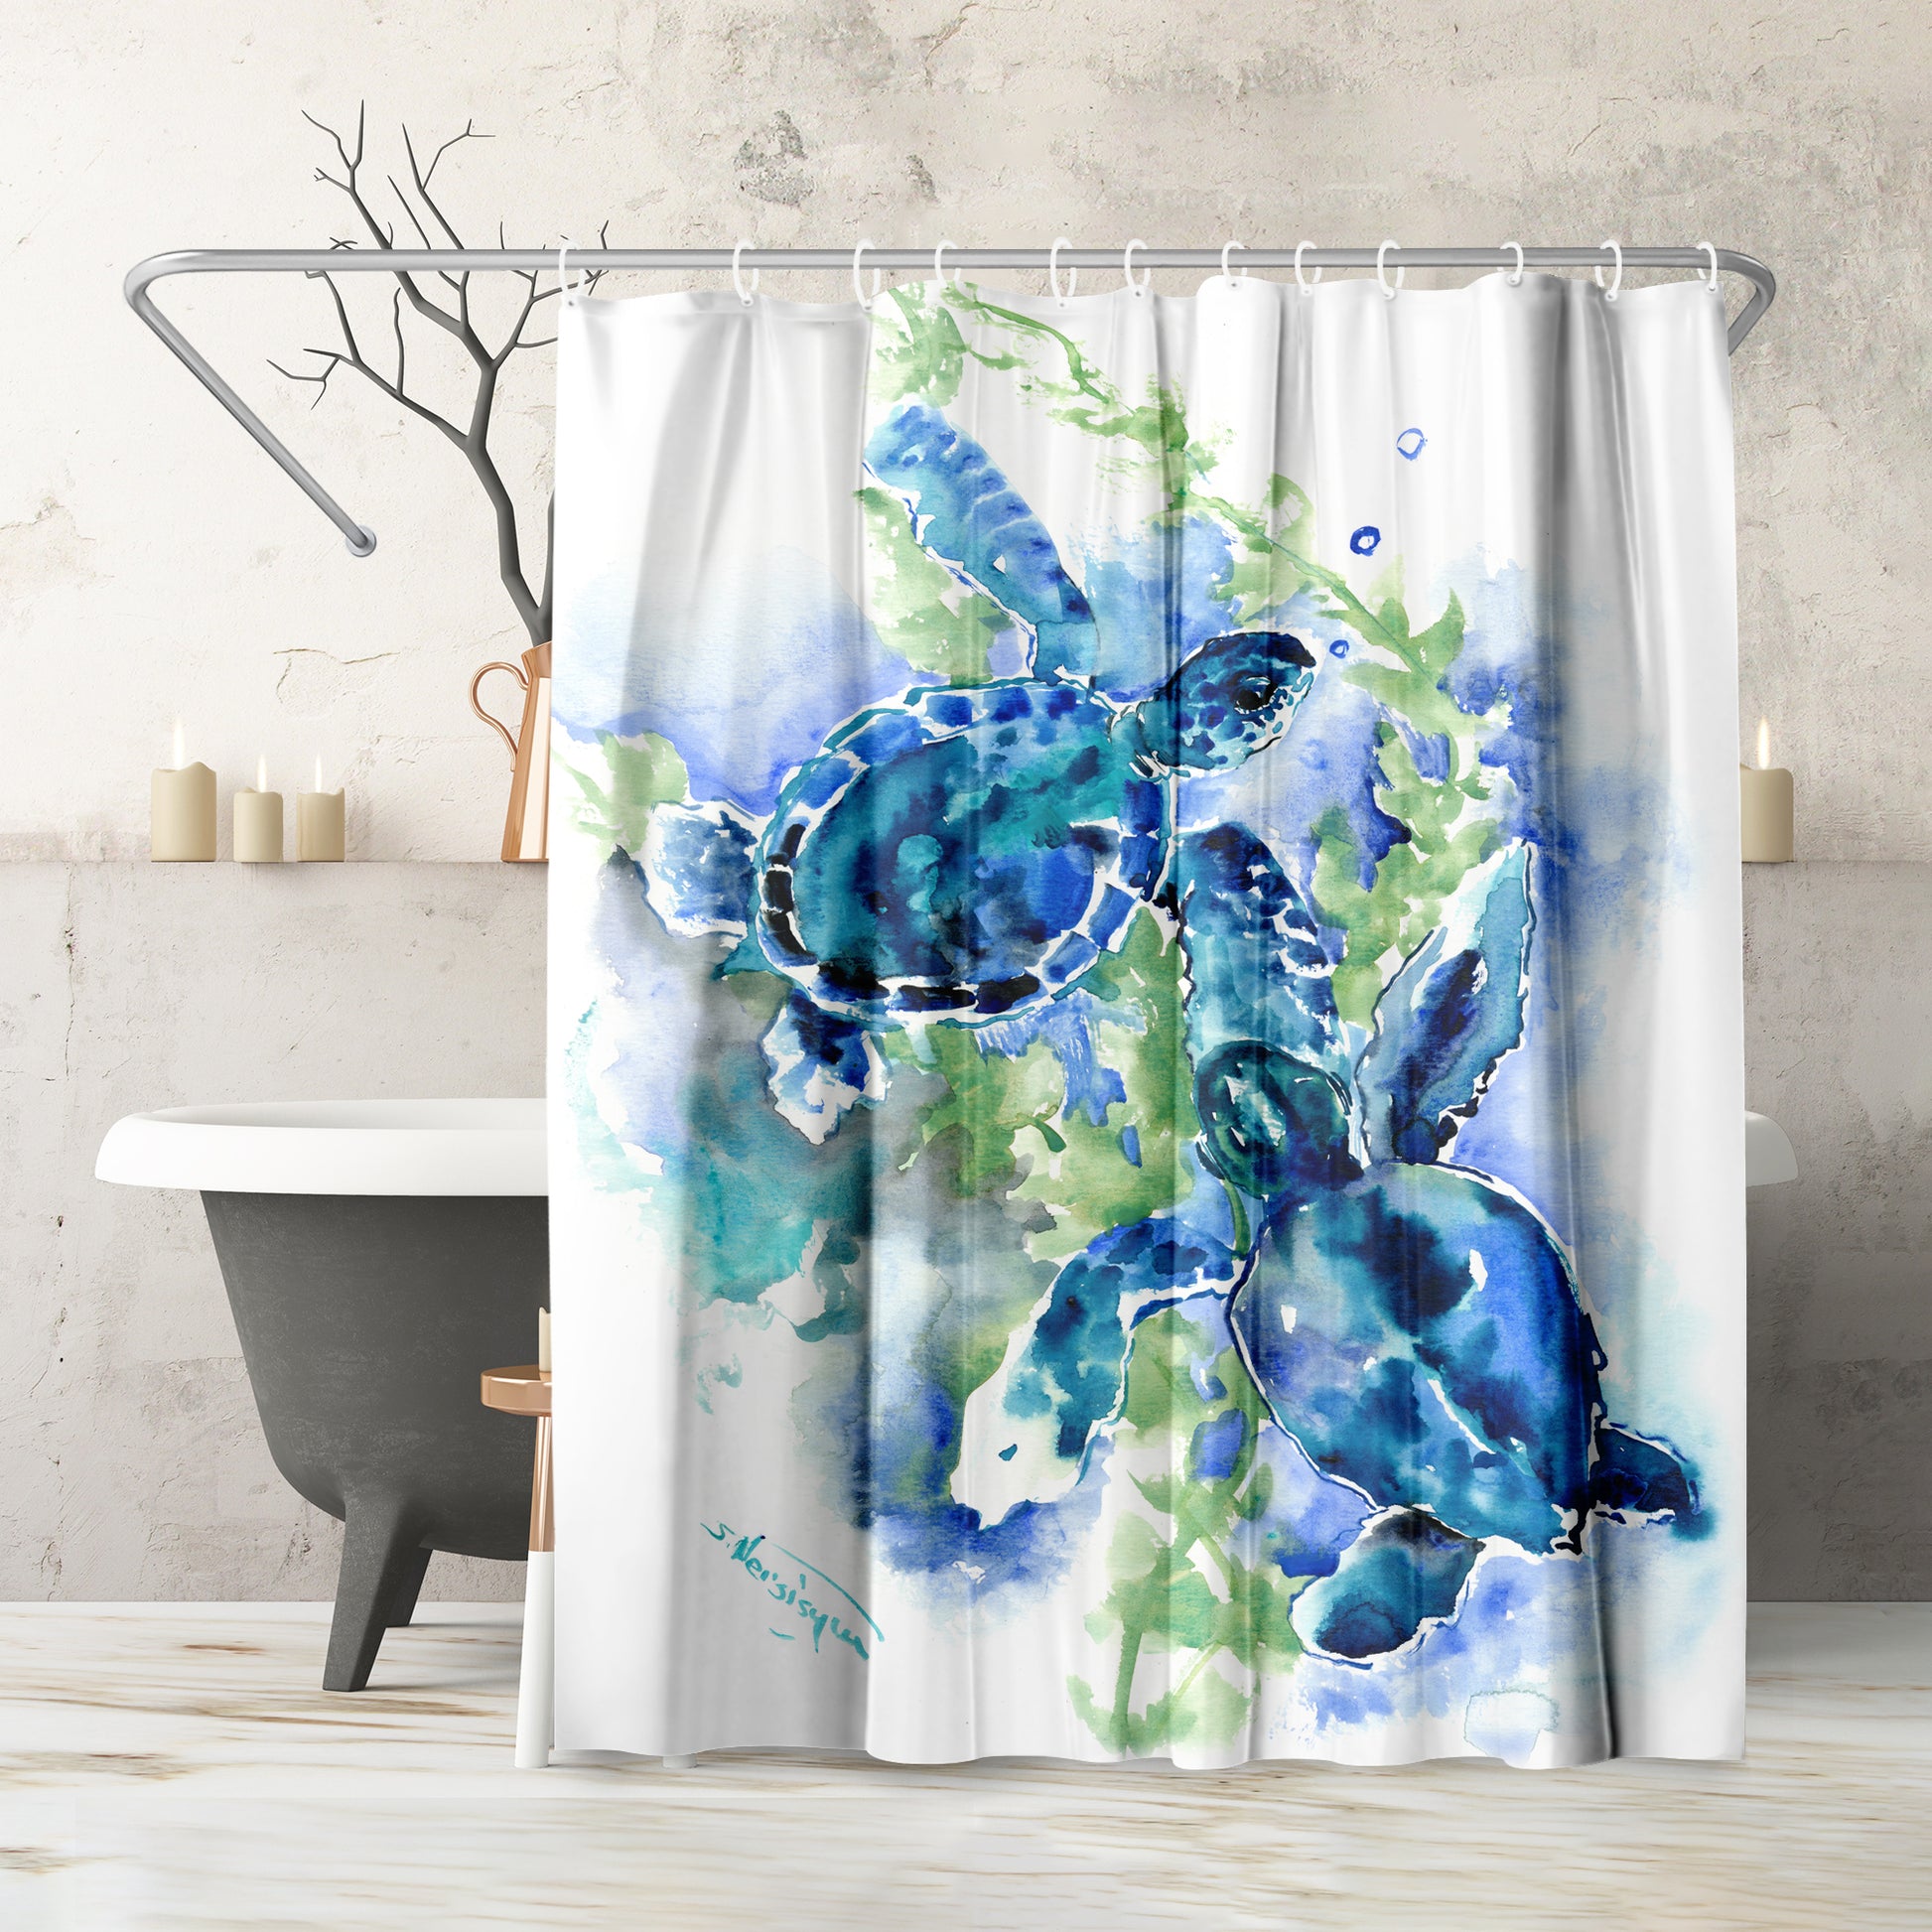 71 x 74 Abstract Shower Curtain with 12 Hooks, Sea Turtles 1 by